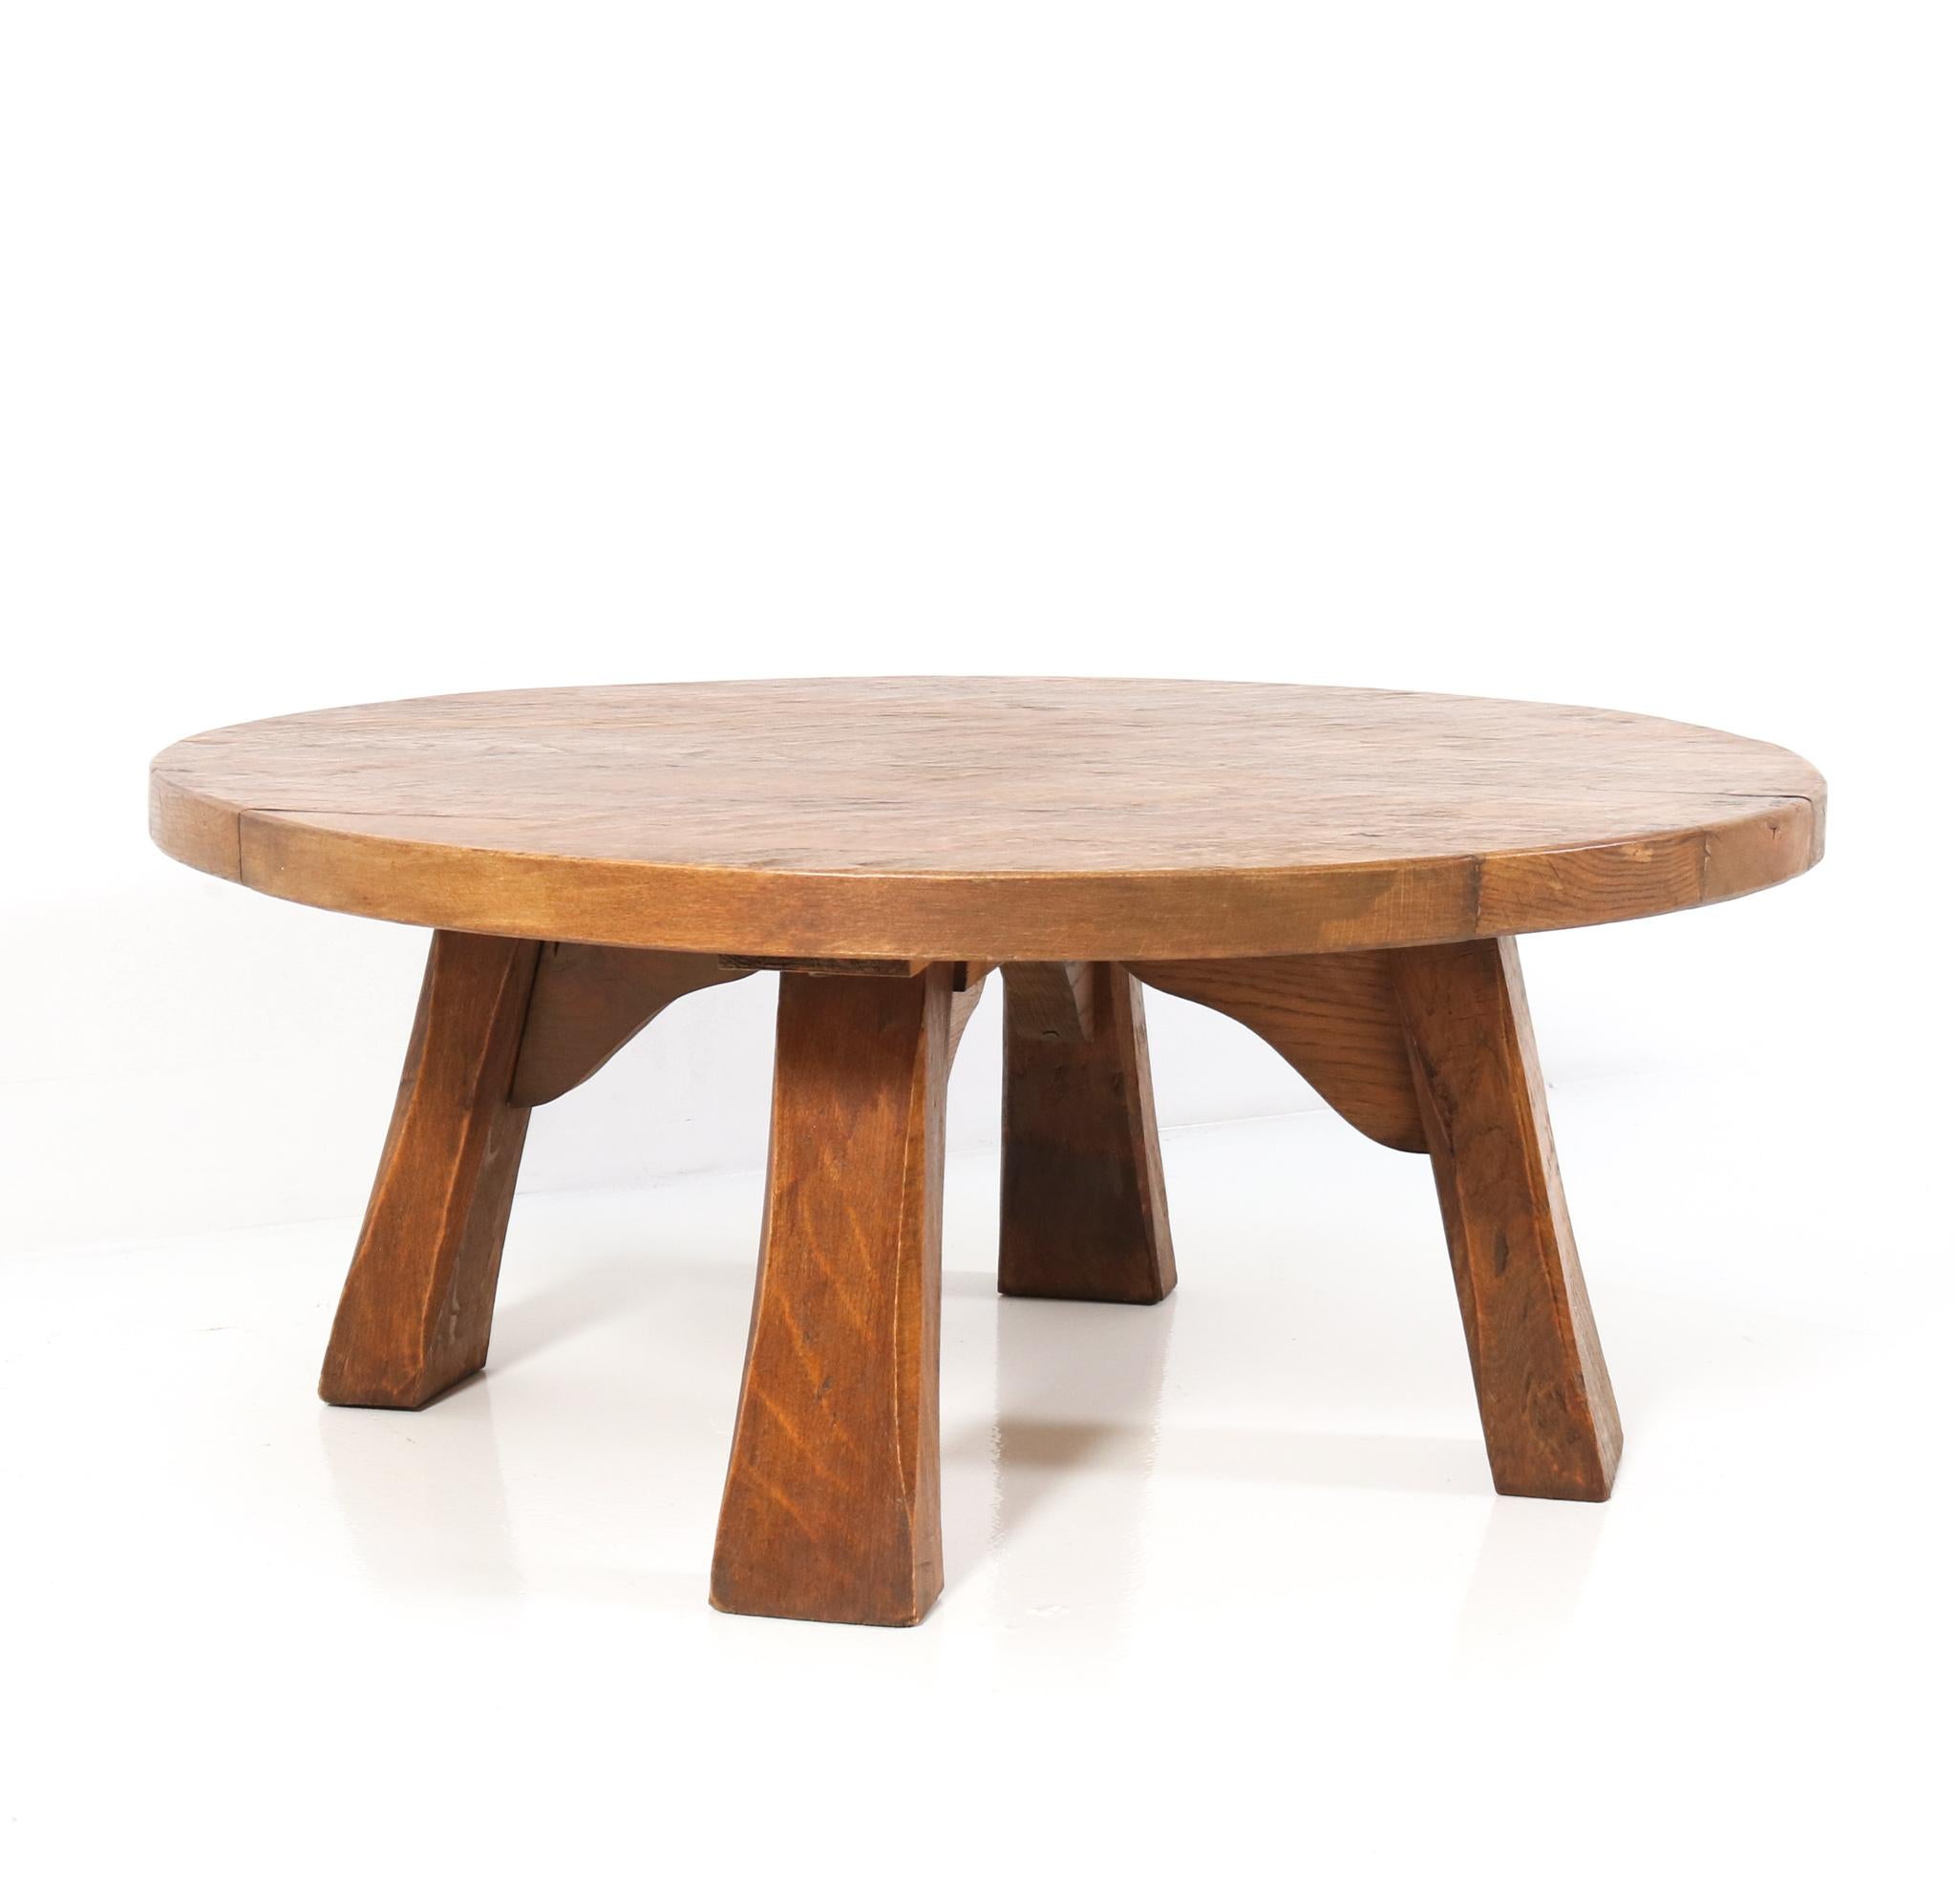 Stunning and rare Mid Century Modern Brutalist round coffee table.
Striking Dutch design from the 1950s.
Solid oak.
This wonderful Mid-Century Modern coffee table is designed in the 
Brutalist style.
The design of this Rustic coffee table is